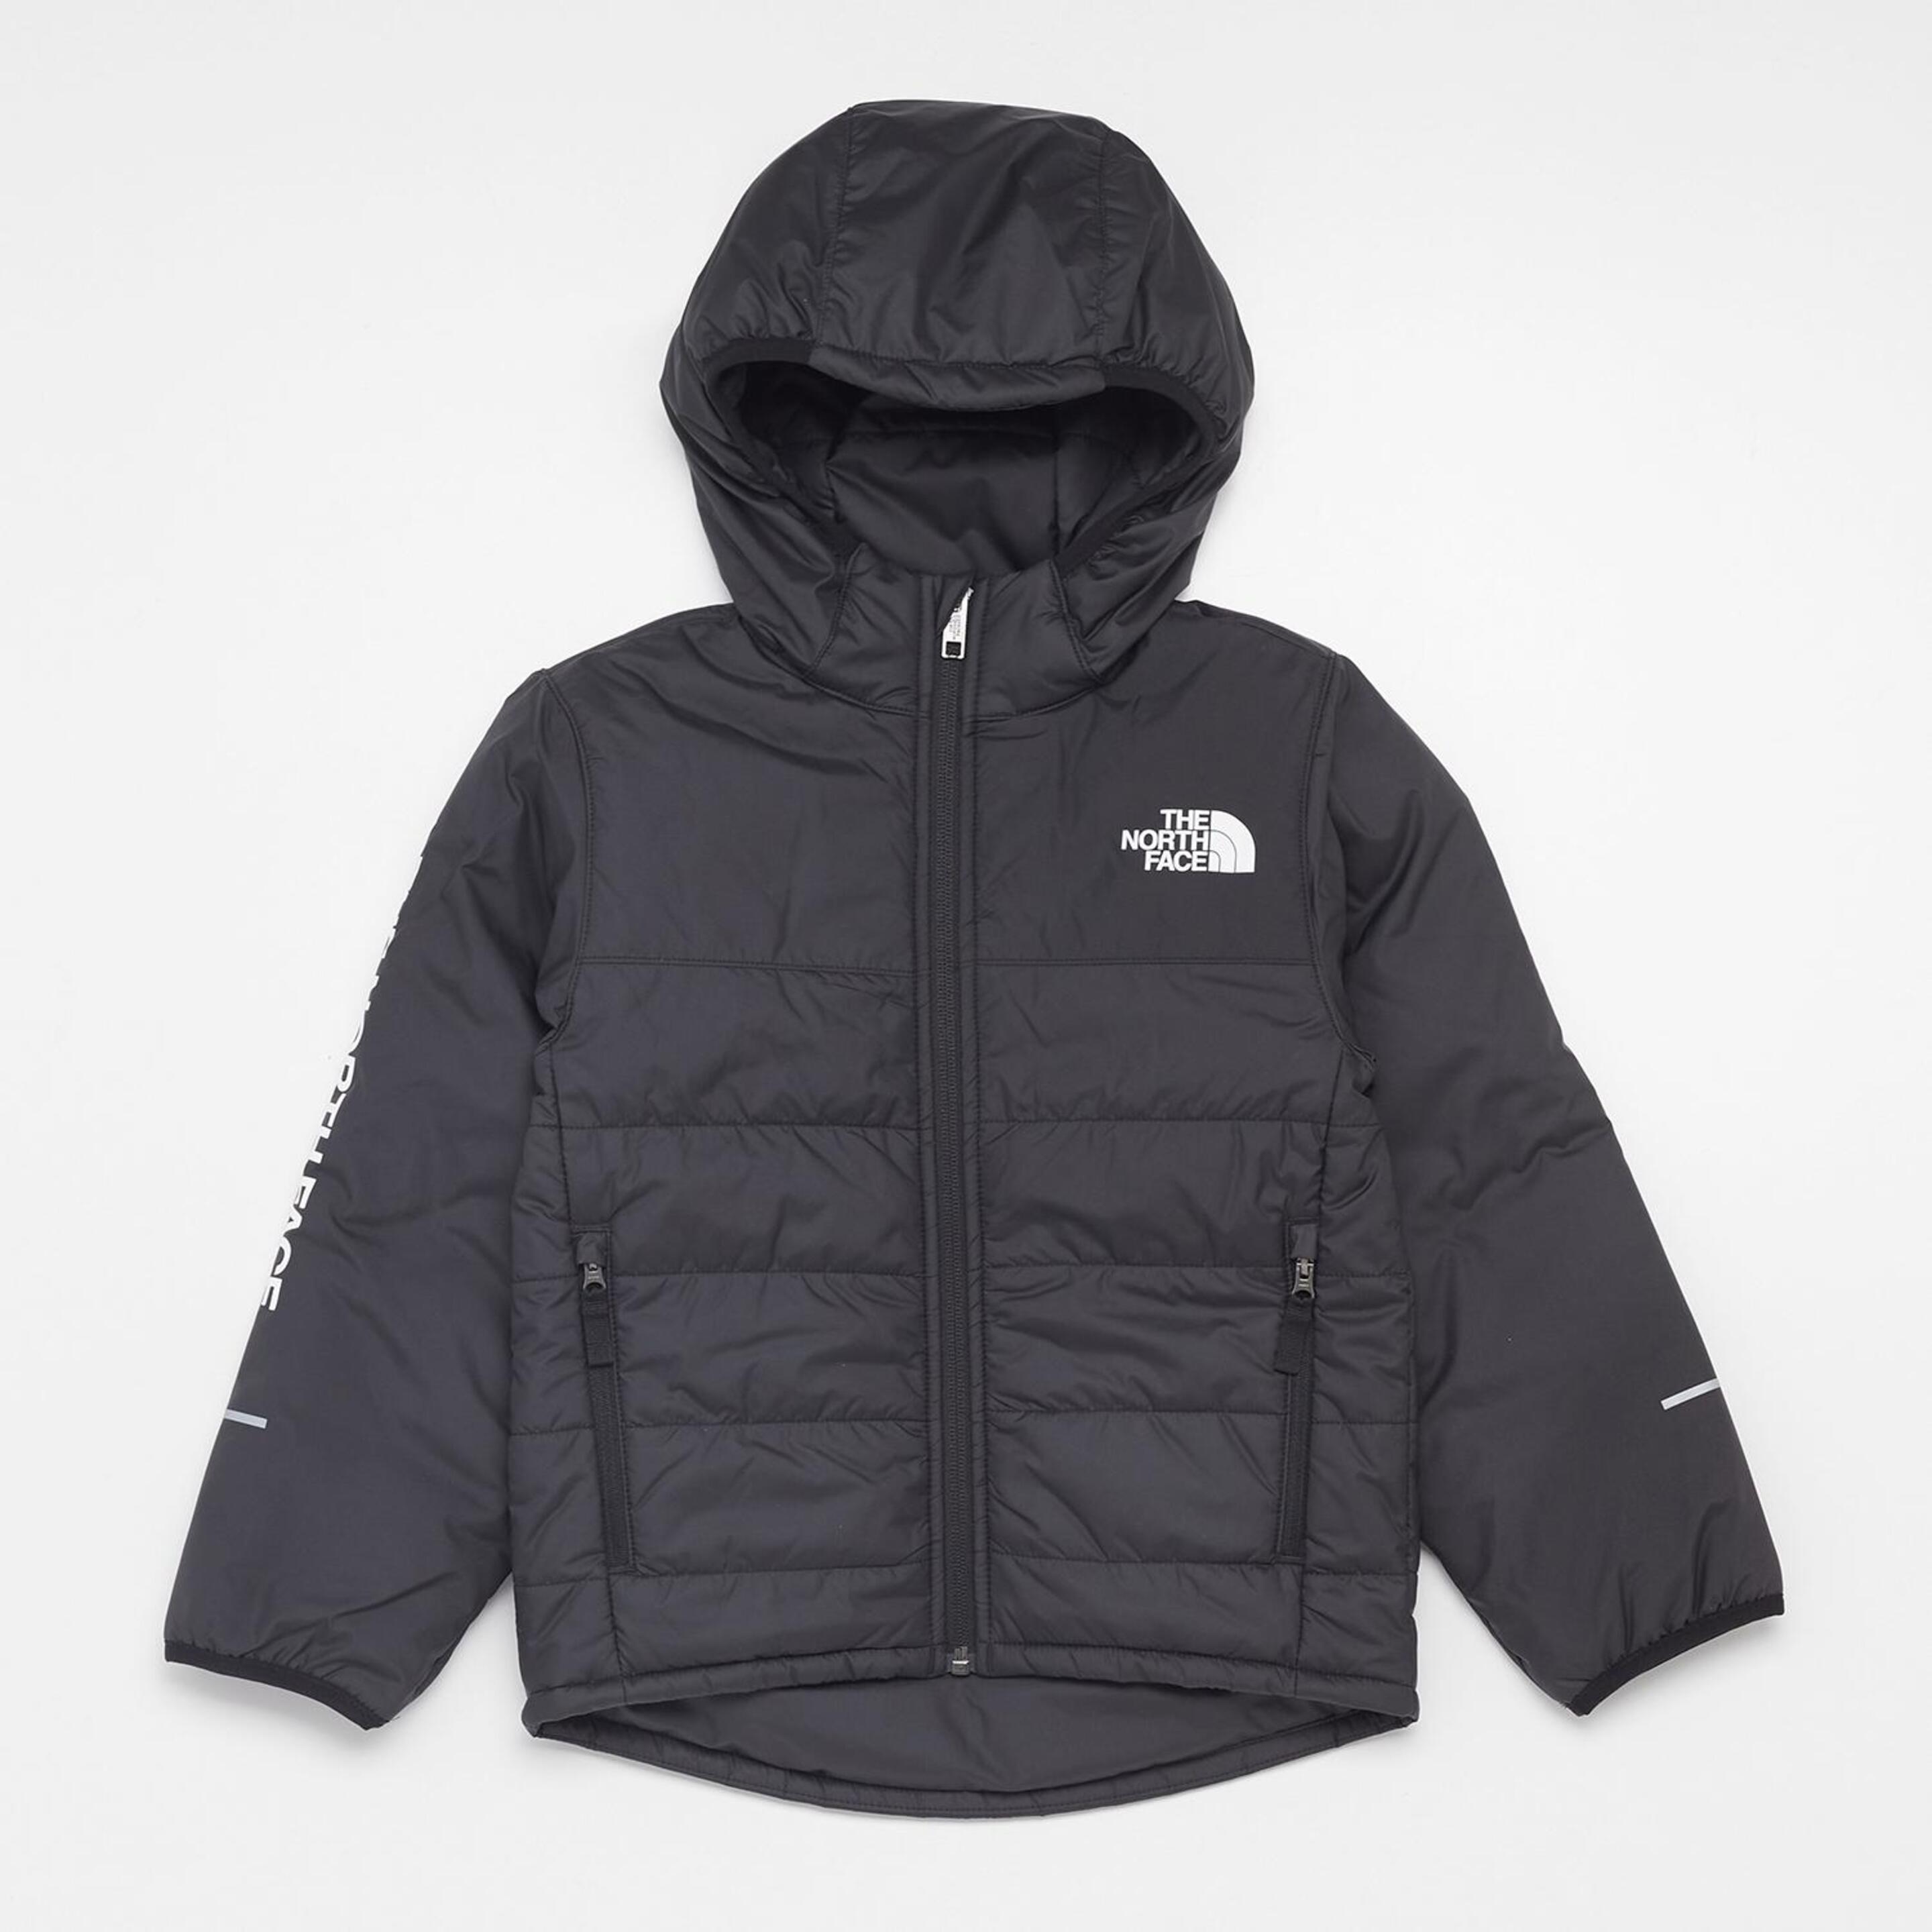 The North Face Never